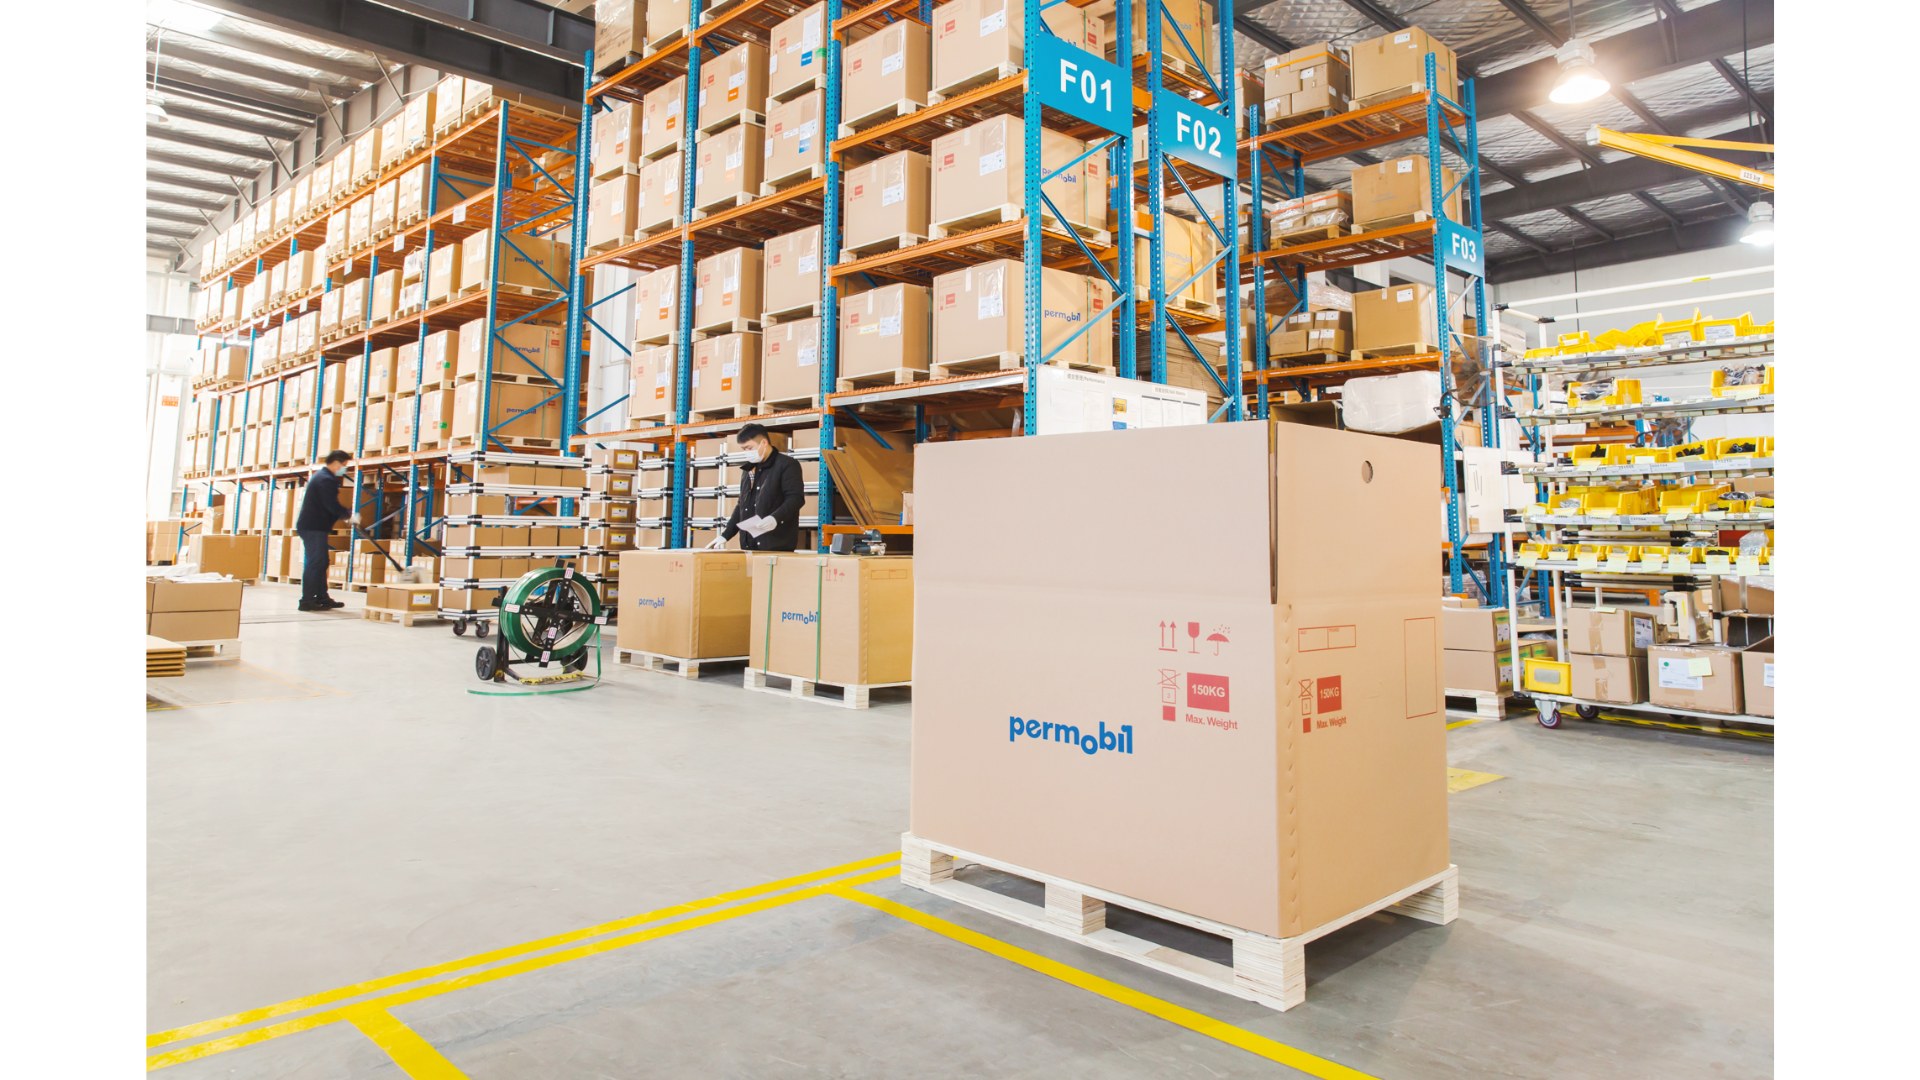 Permobil is committed to shifting away from unsustainable packaging materials in favor of sustainable alternatives